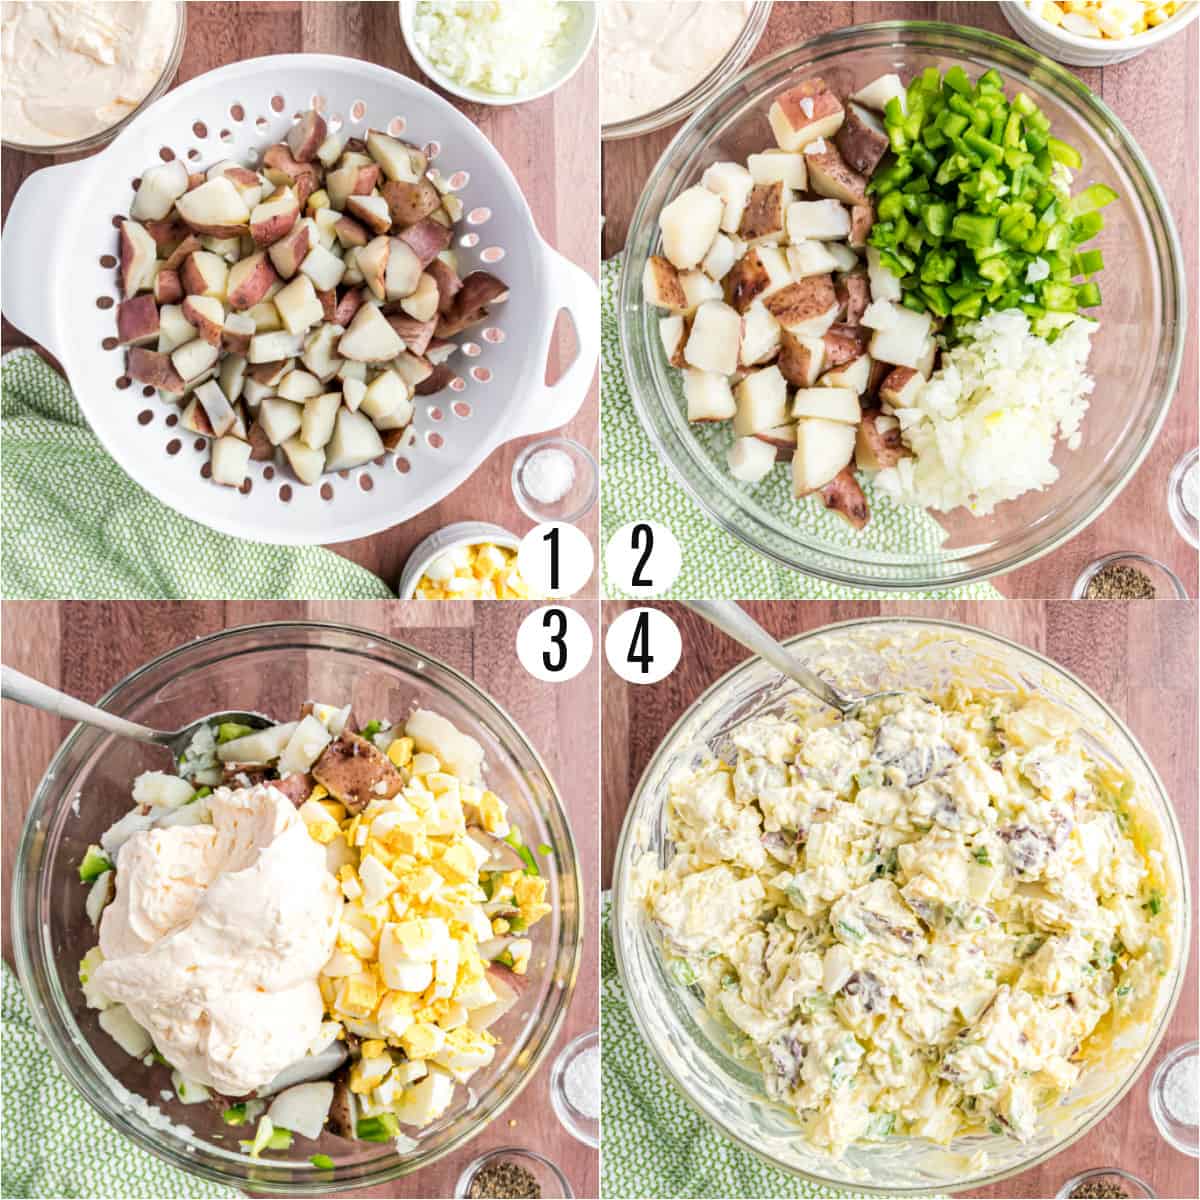 Step by step photos showing how to make potato salad.